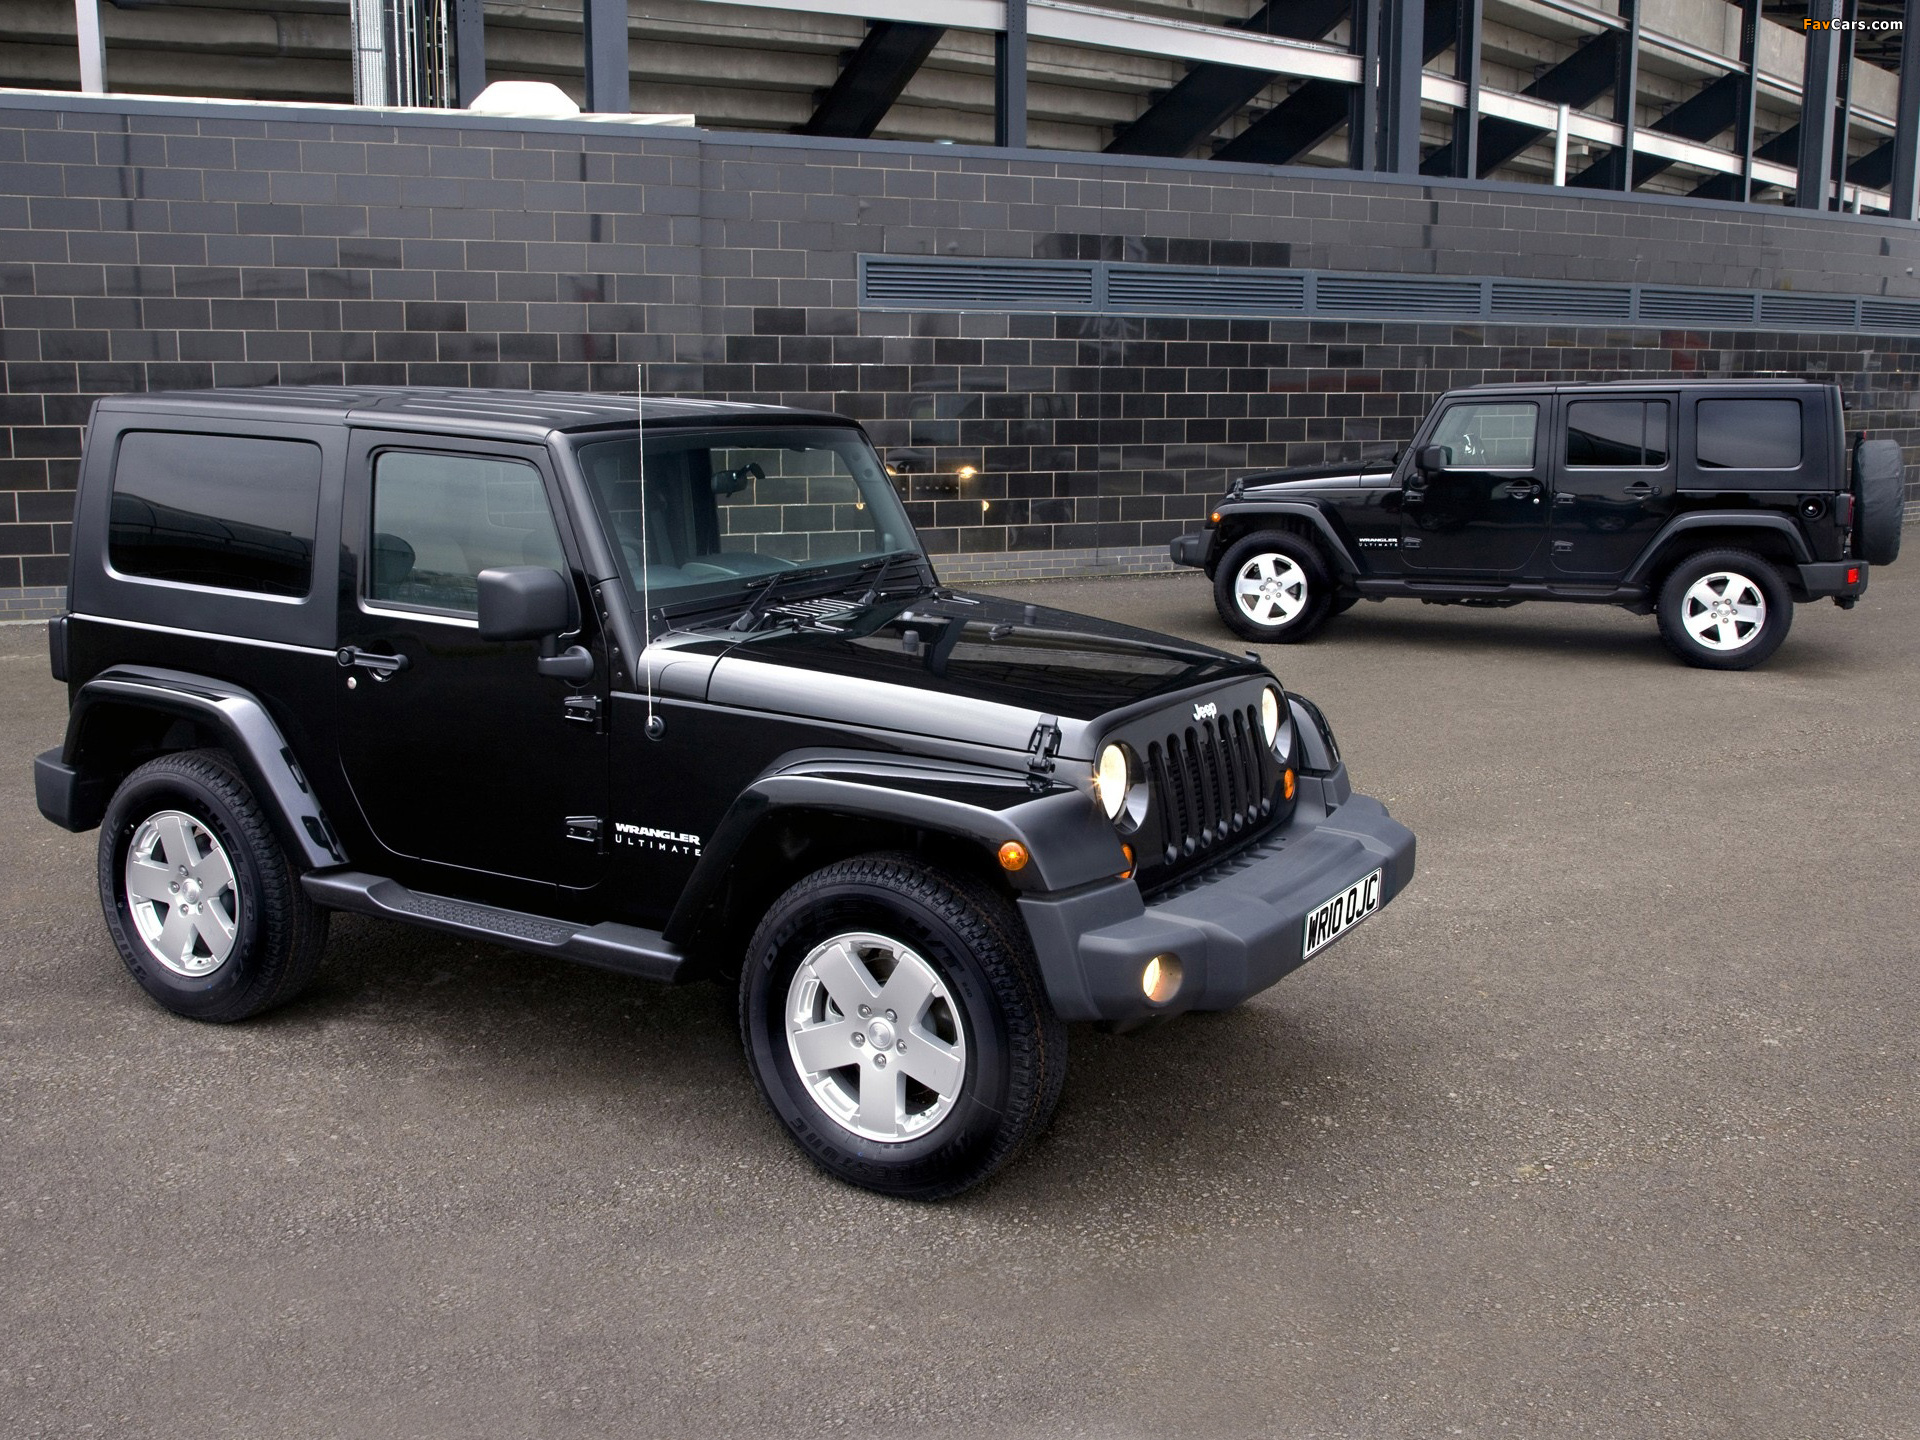 Images of Jeep Wrangler (1920 x 1440)